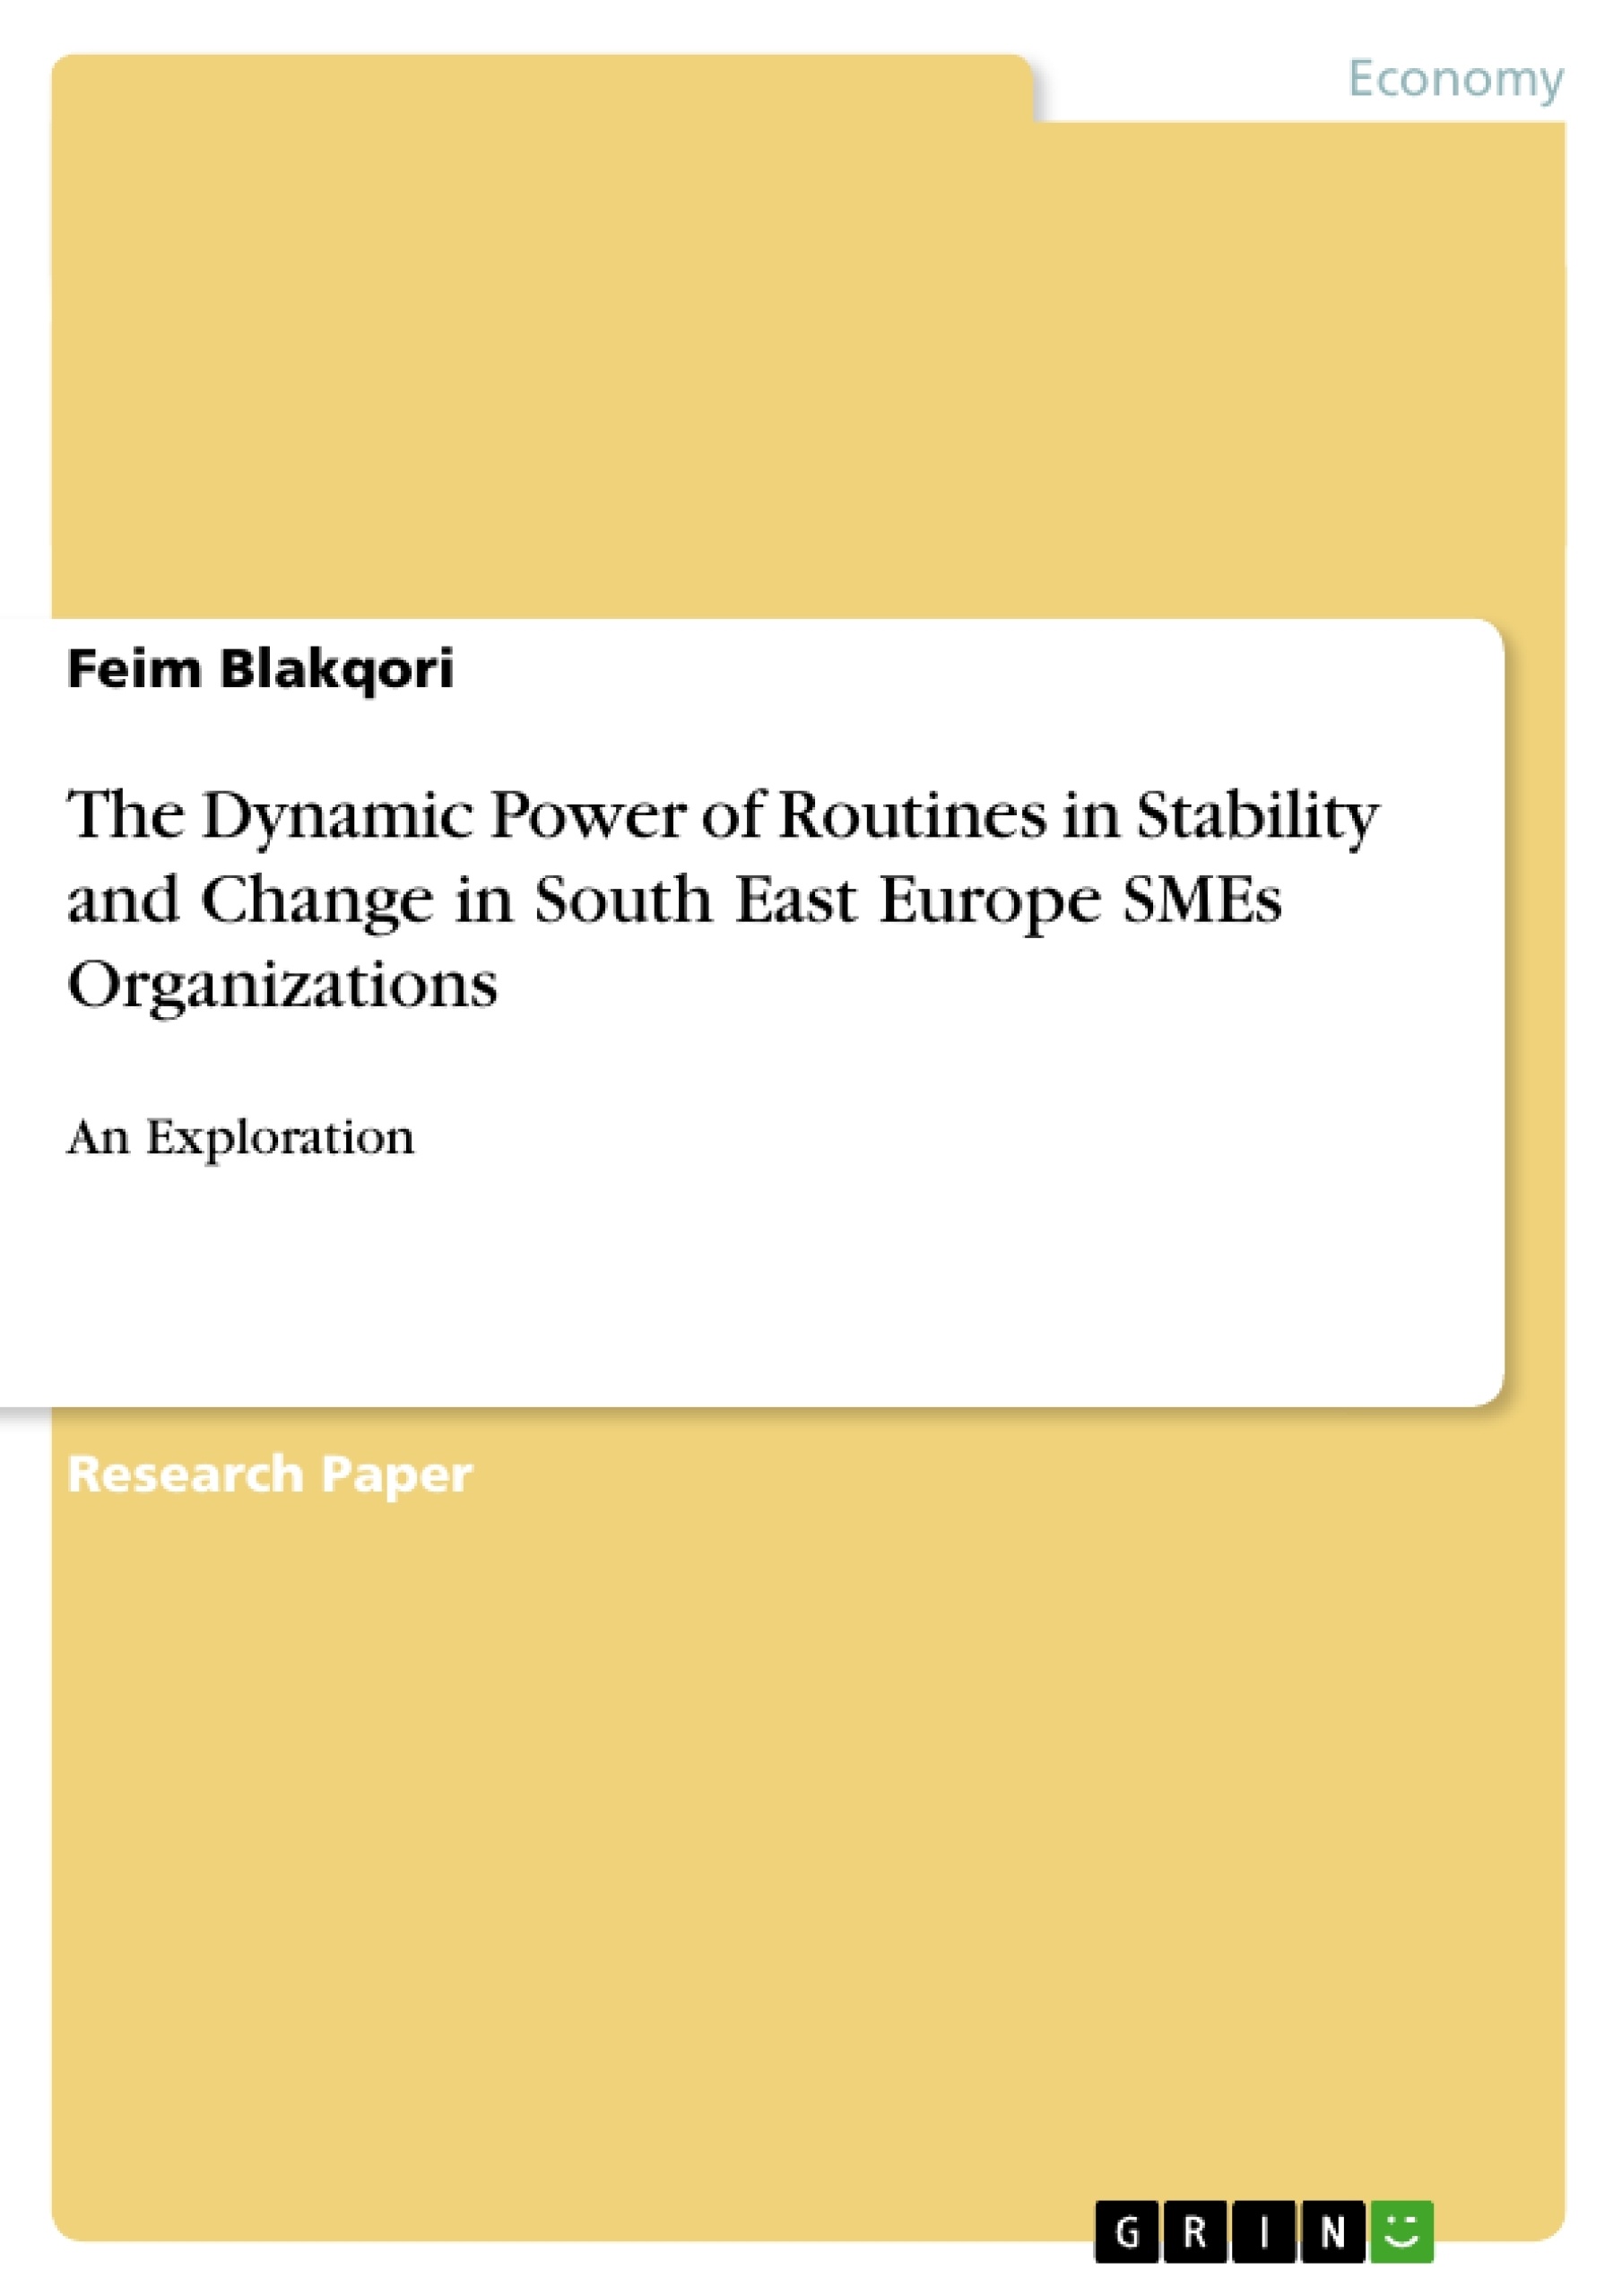 Titre: The Dynamic Power of Routines in Stability and Change in South East Europe SMEs Organizations